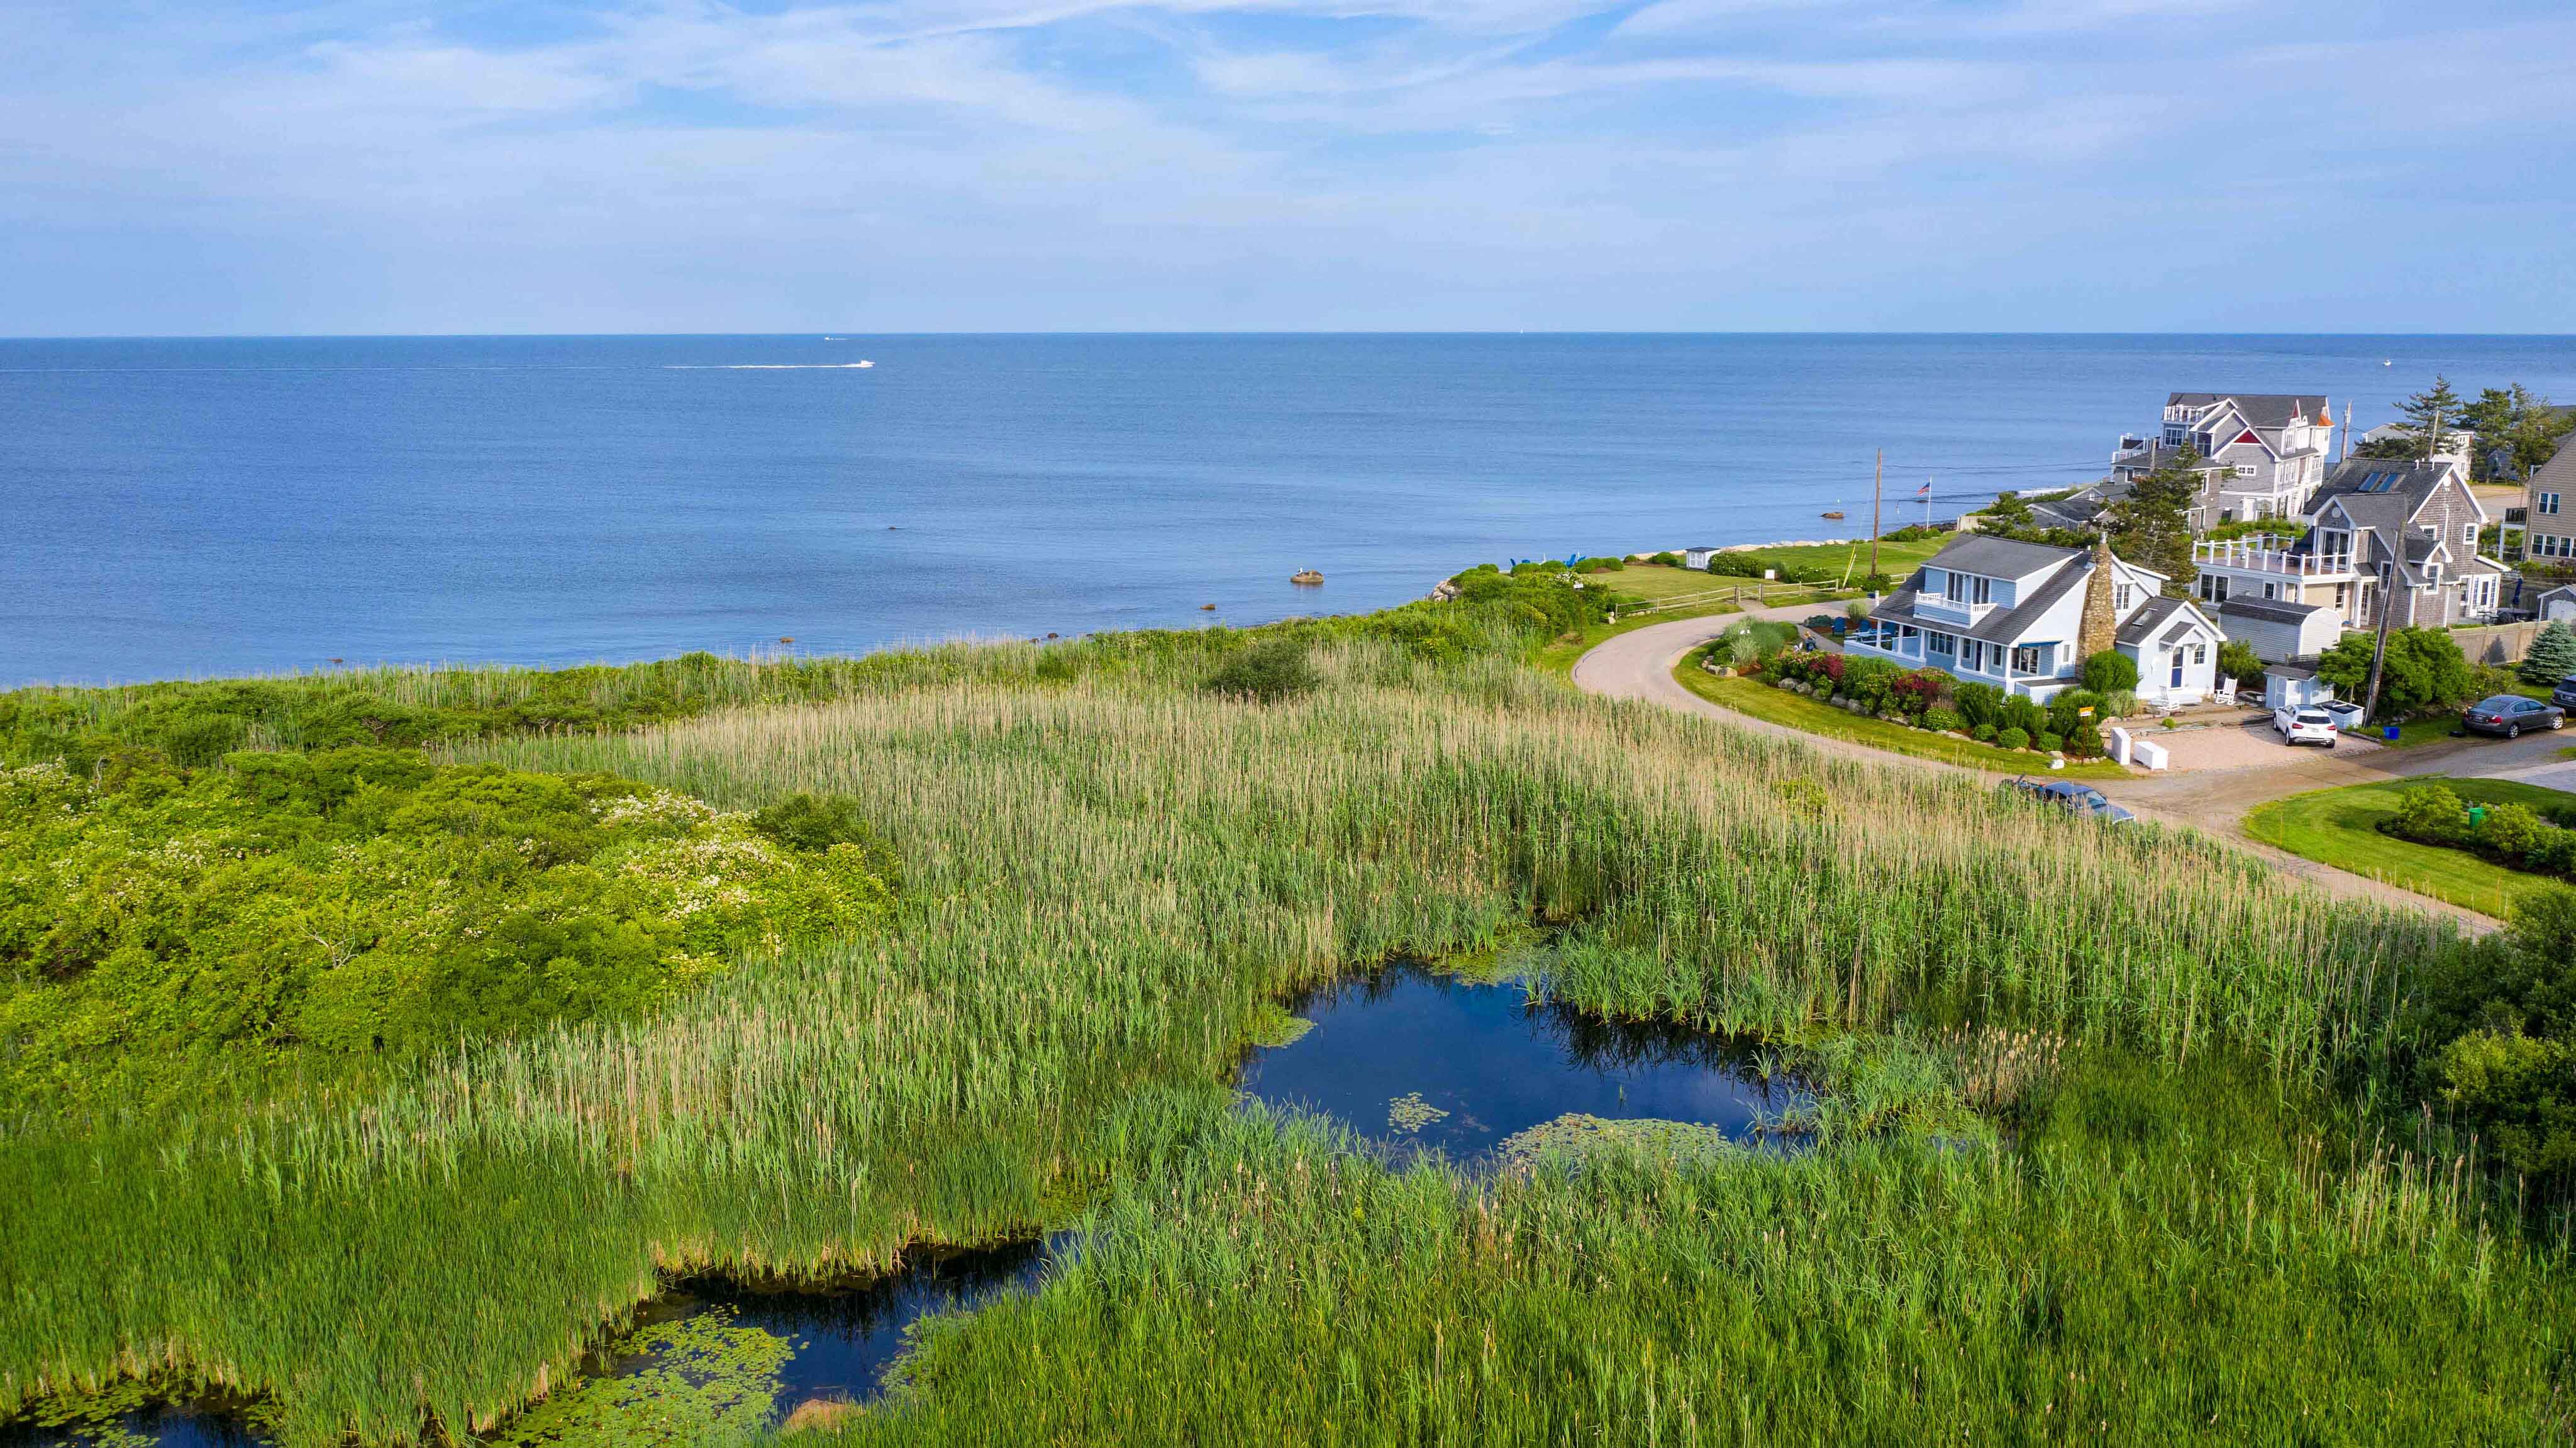 CONTEMPORARY CAPE COD OFF NARRAGANSETT’S OCEAN ROAD SELLS FOR $1.53M AFTER FOUR DAYS ON MARKET